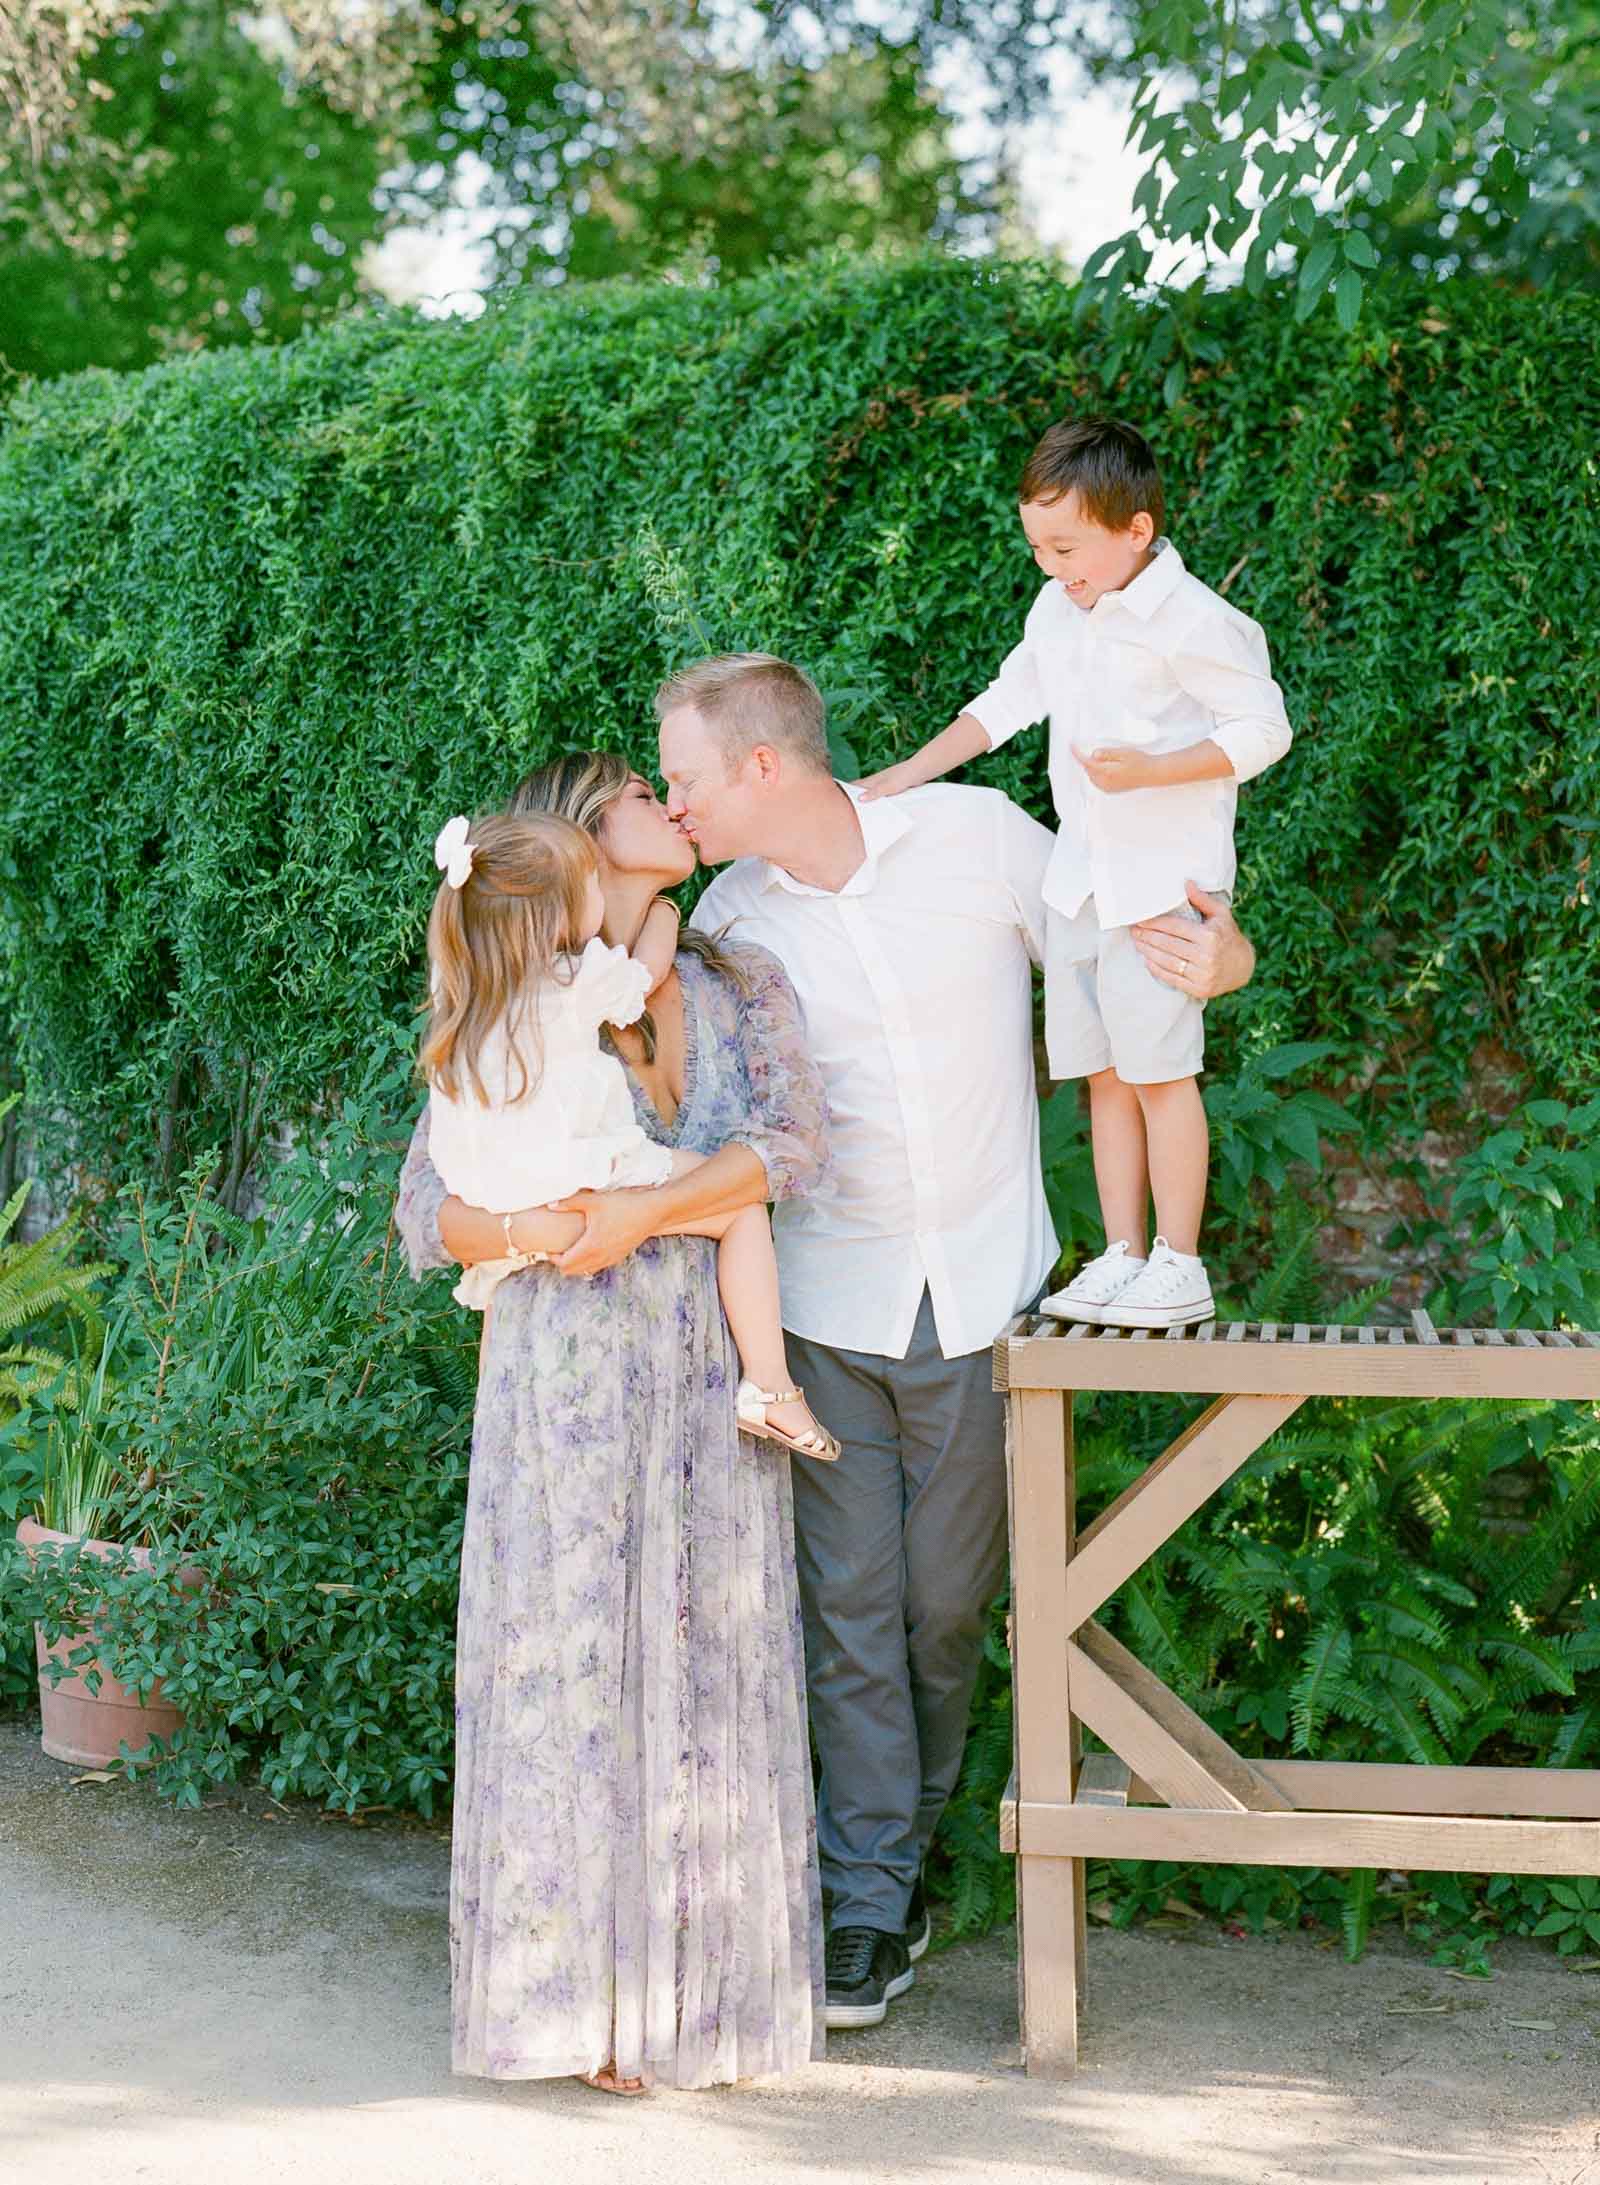 A Timeless Family Session at Gamble Gardens- Light and airy family photography - San Francisco Bay Area Family Photography on Film - Family on Film - California Family Session - Mom and Dad looking at Children - Kent Avenue Photography - www.kentavenuephotography.com